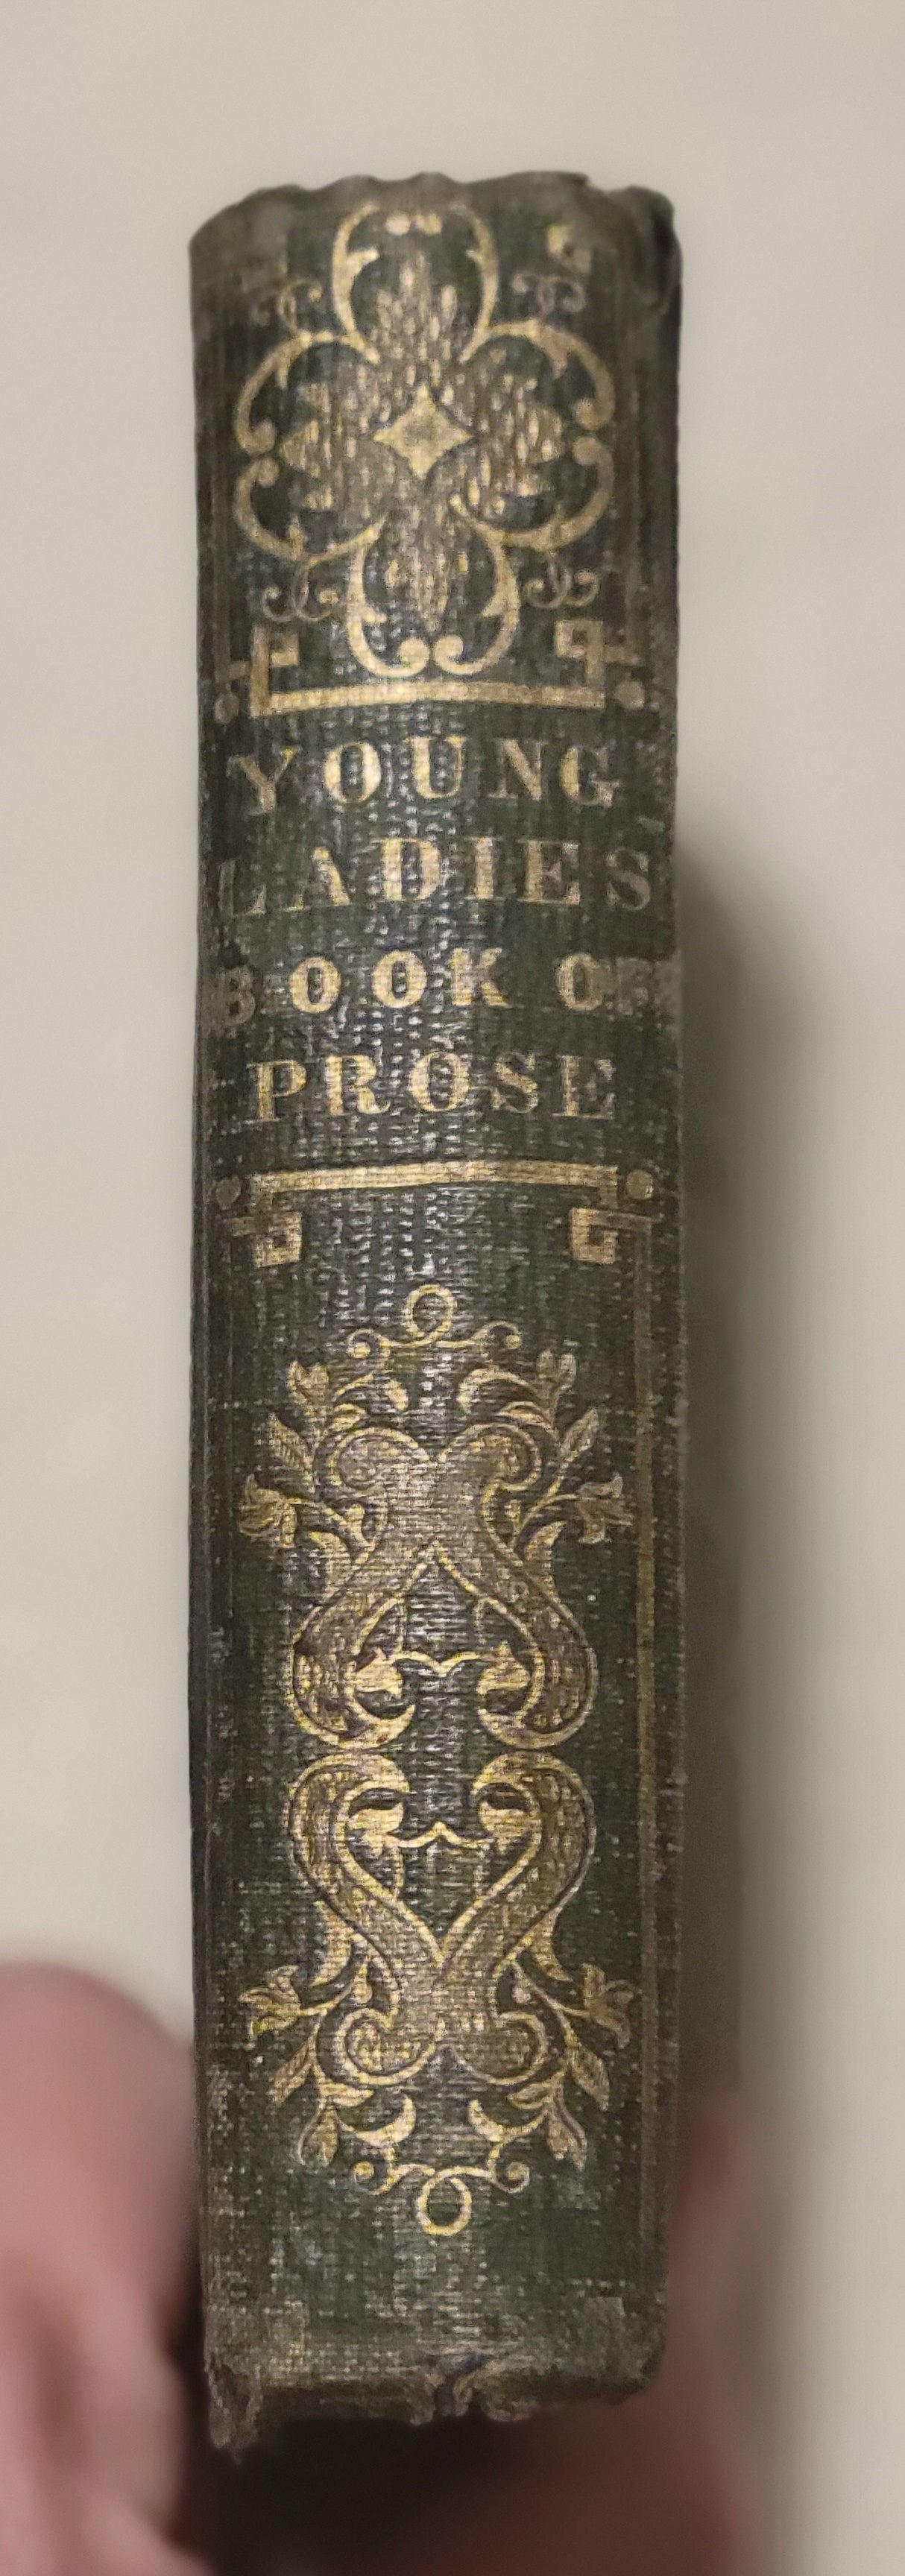 Antique book for sale “Young Lady's Book of Elegant Prose” by British and American authors, published by John Ball in Philadelphia in 1851. Spine.